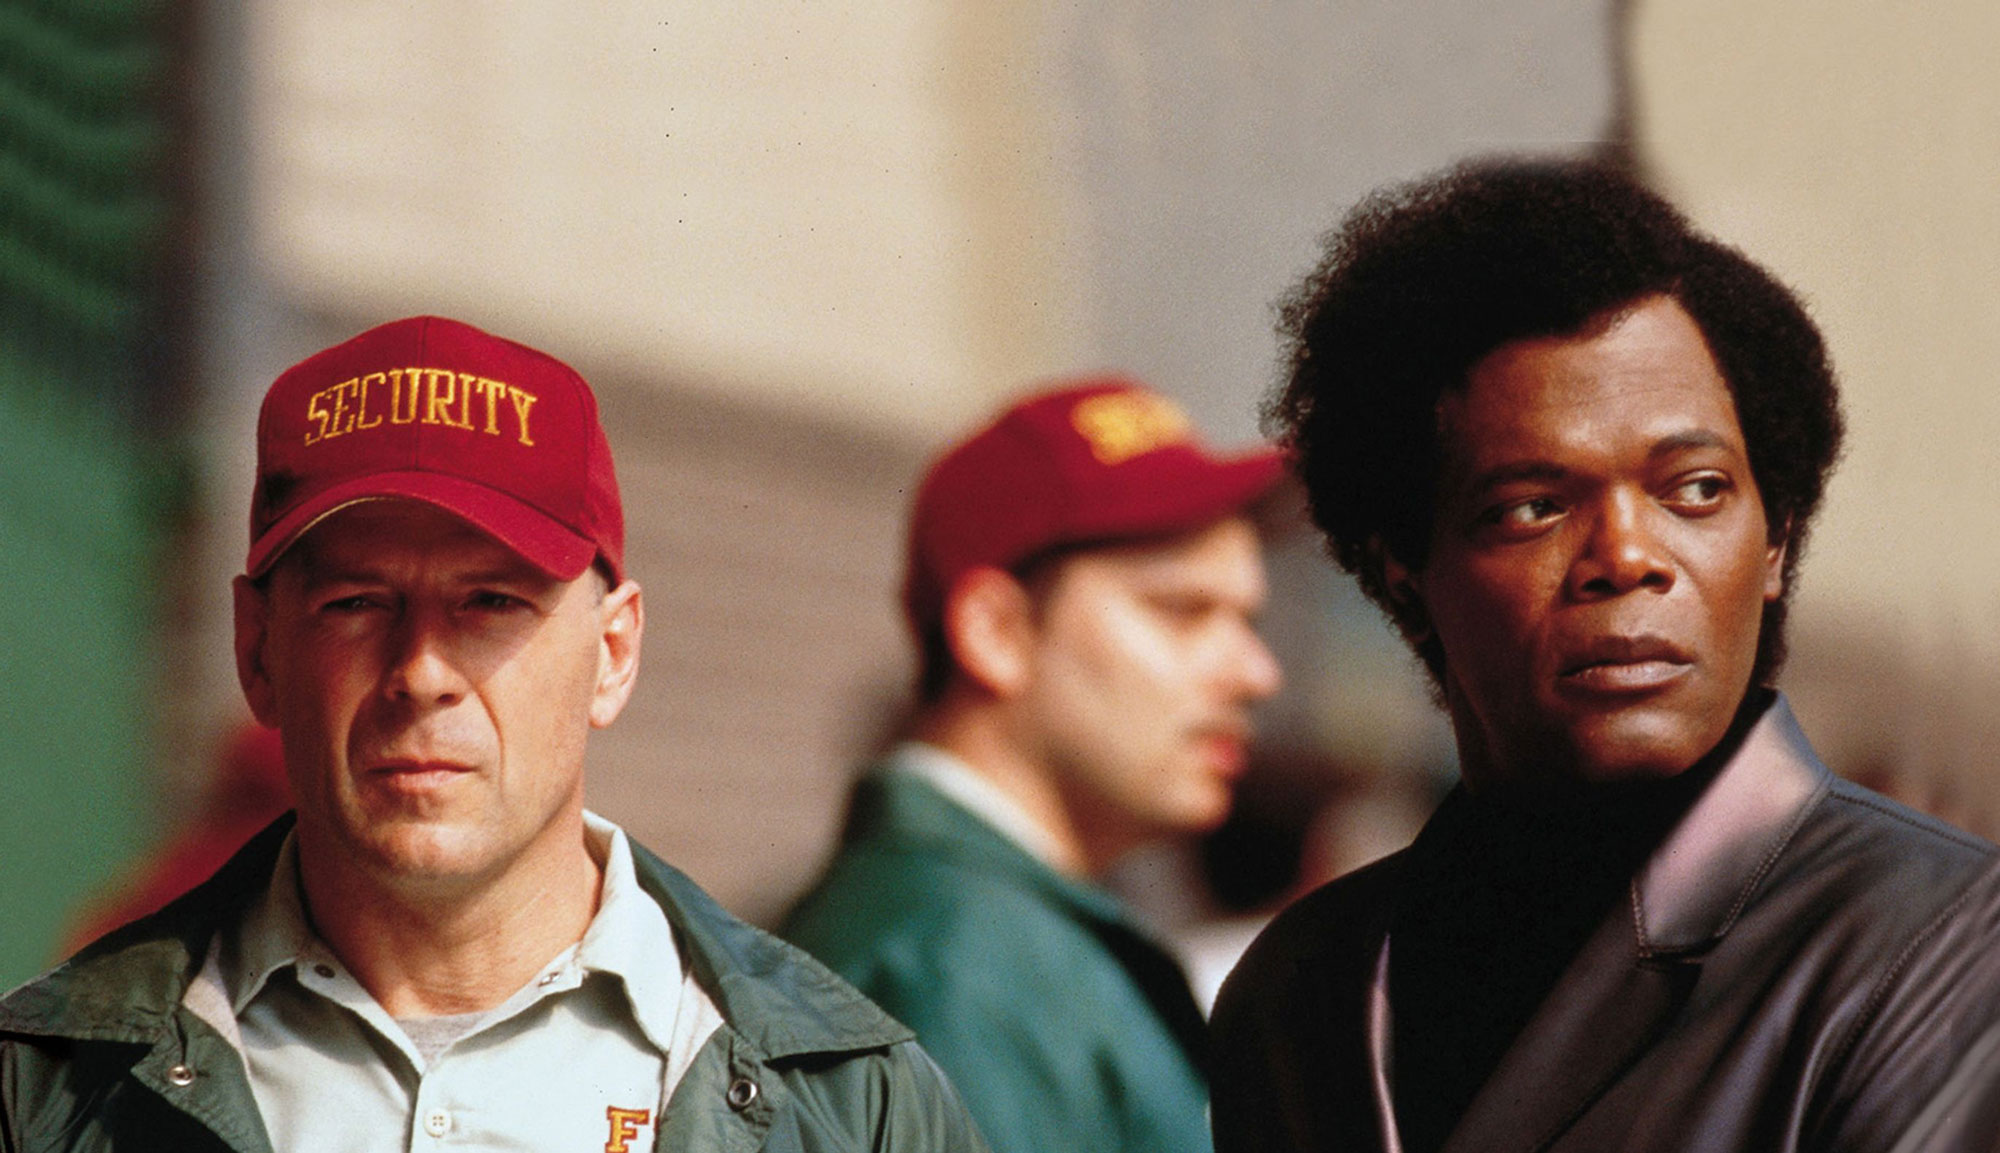 Bruce Willis and Samuel L. Jackson in "Unbreakable"